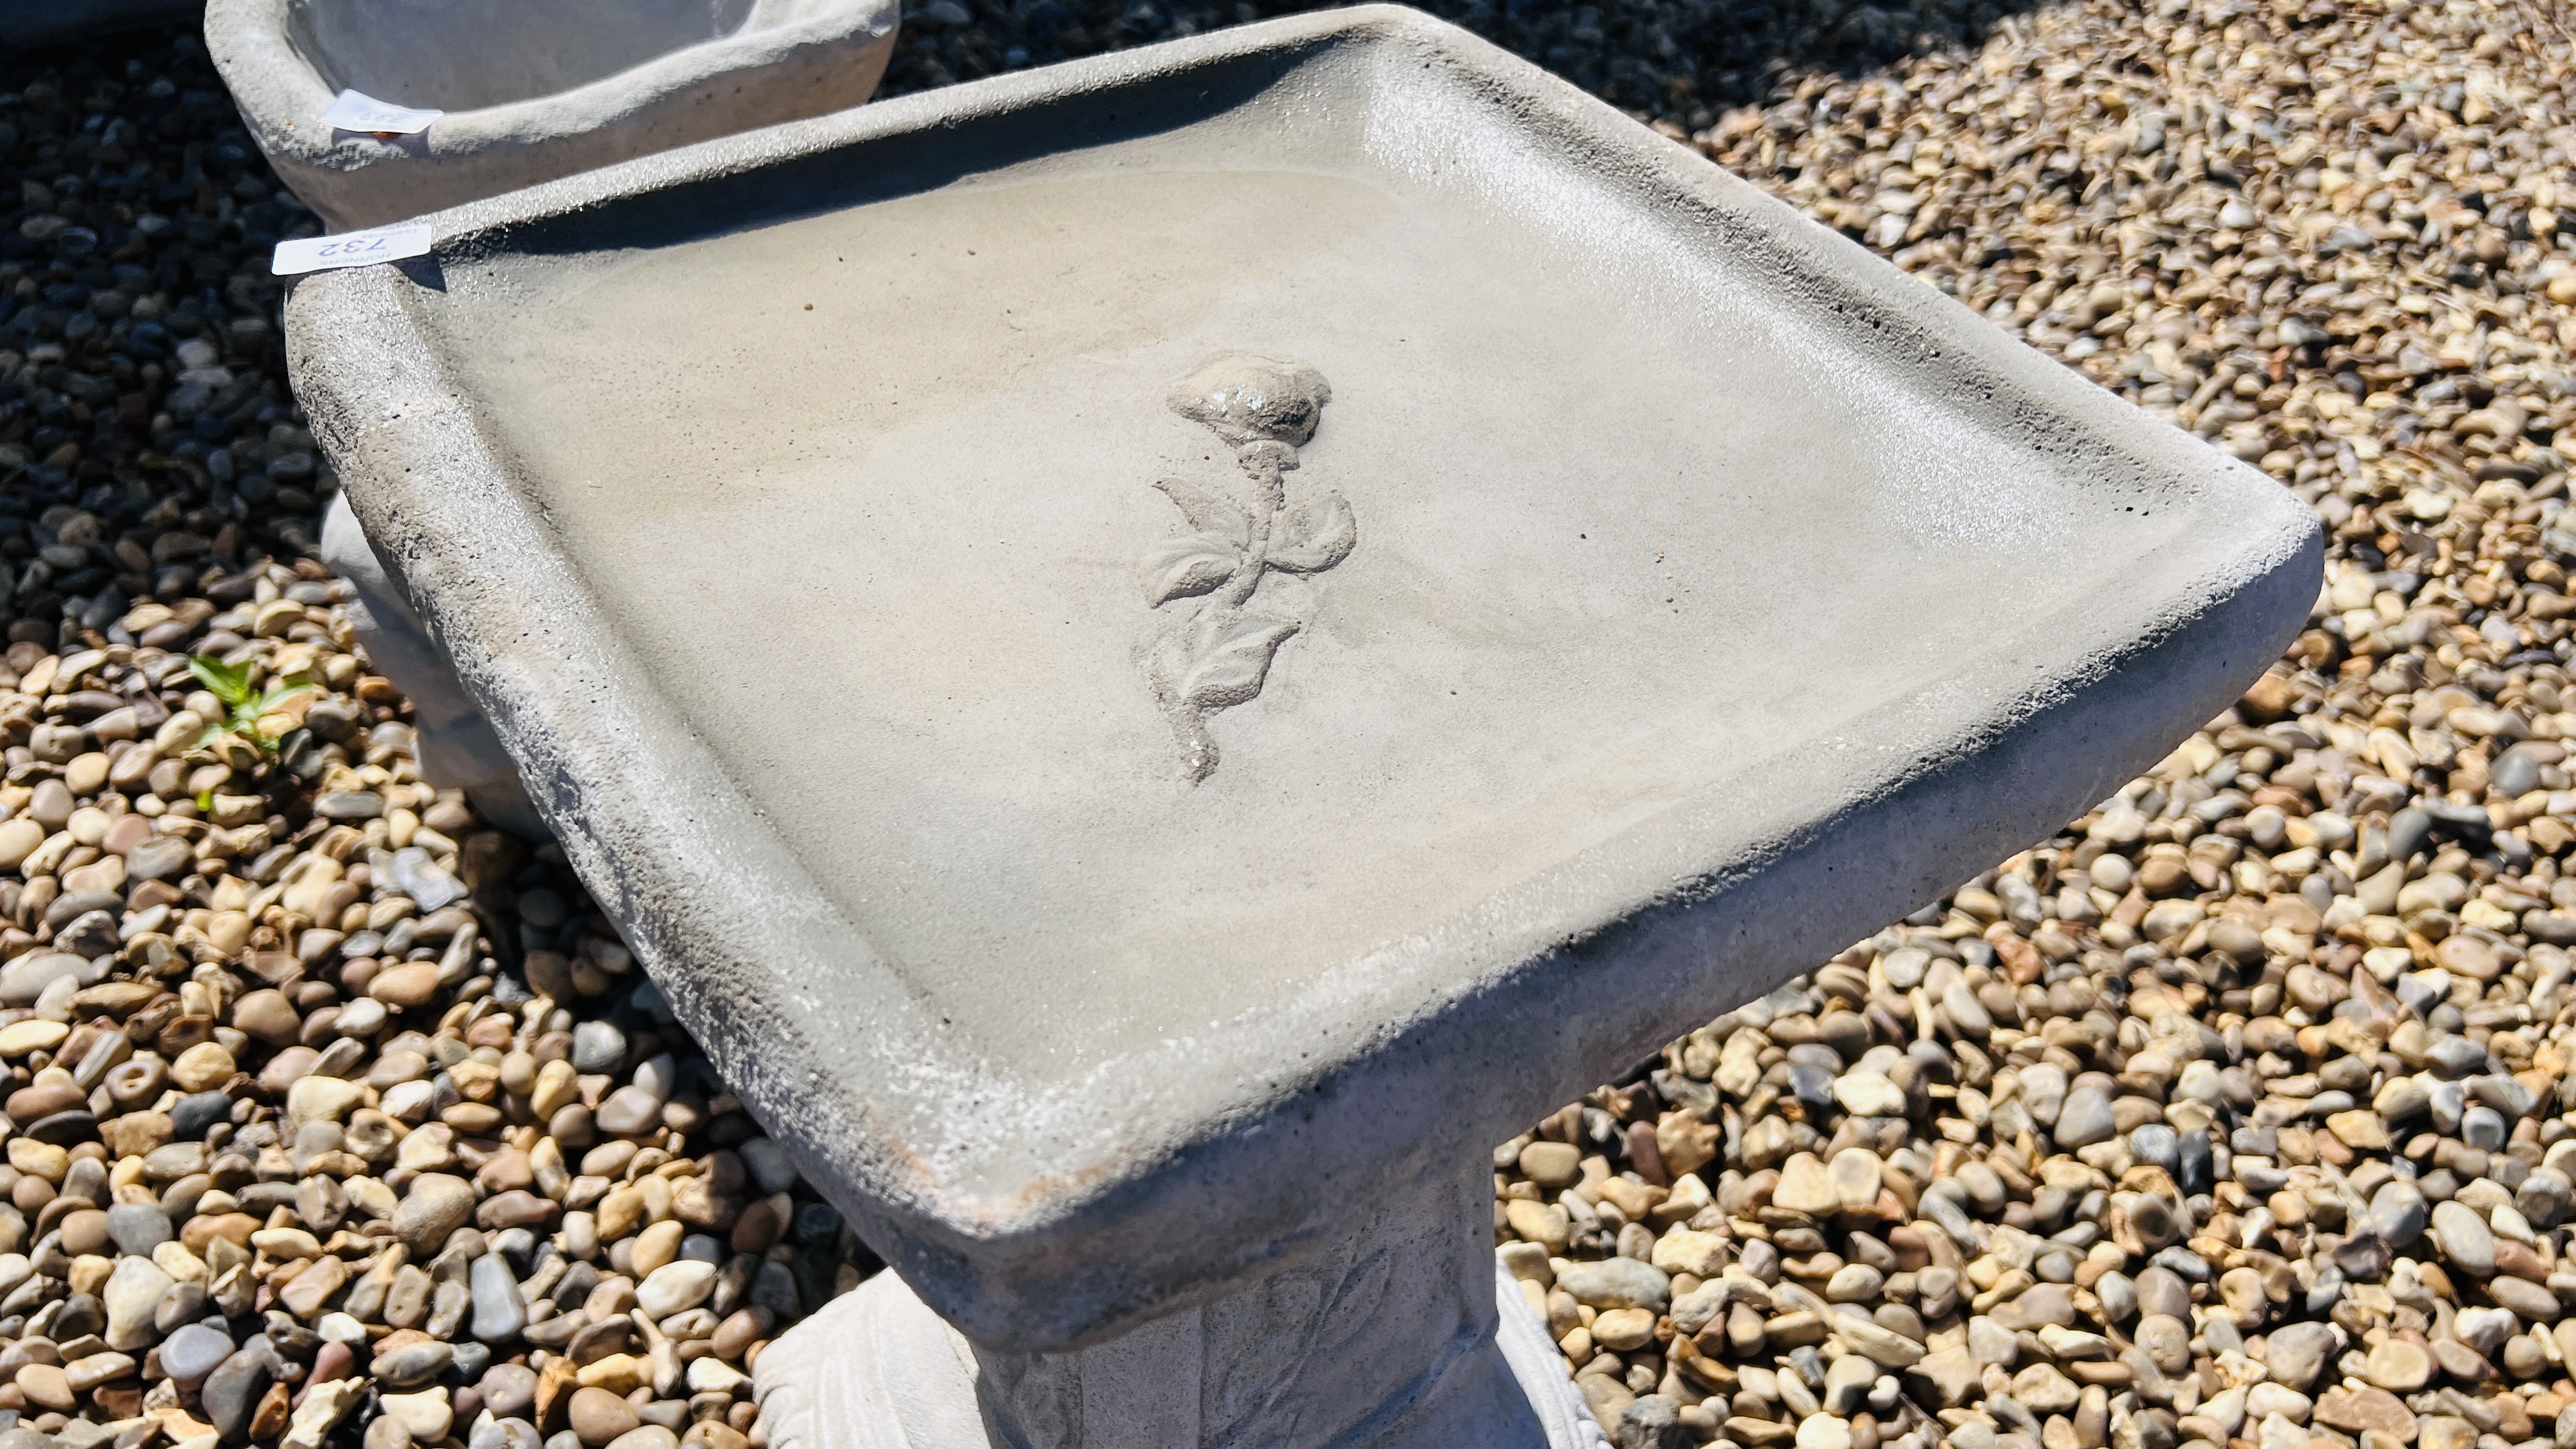 A SQUARE STONEWORK GARDEN BIRD BATH WITH RELIEF ROSE DECORATION, HEIGHT 52CM. - Image 2 of 3